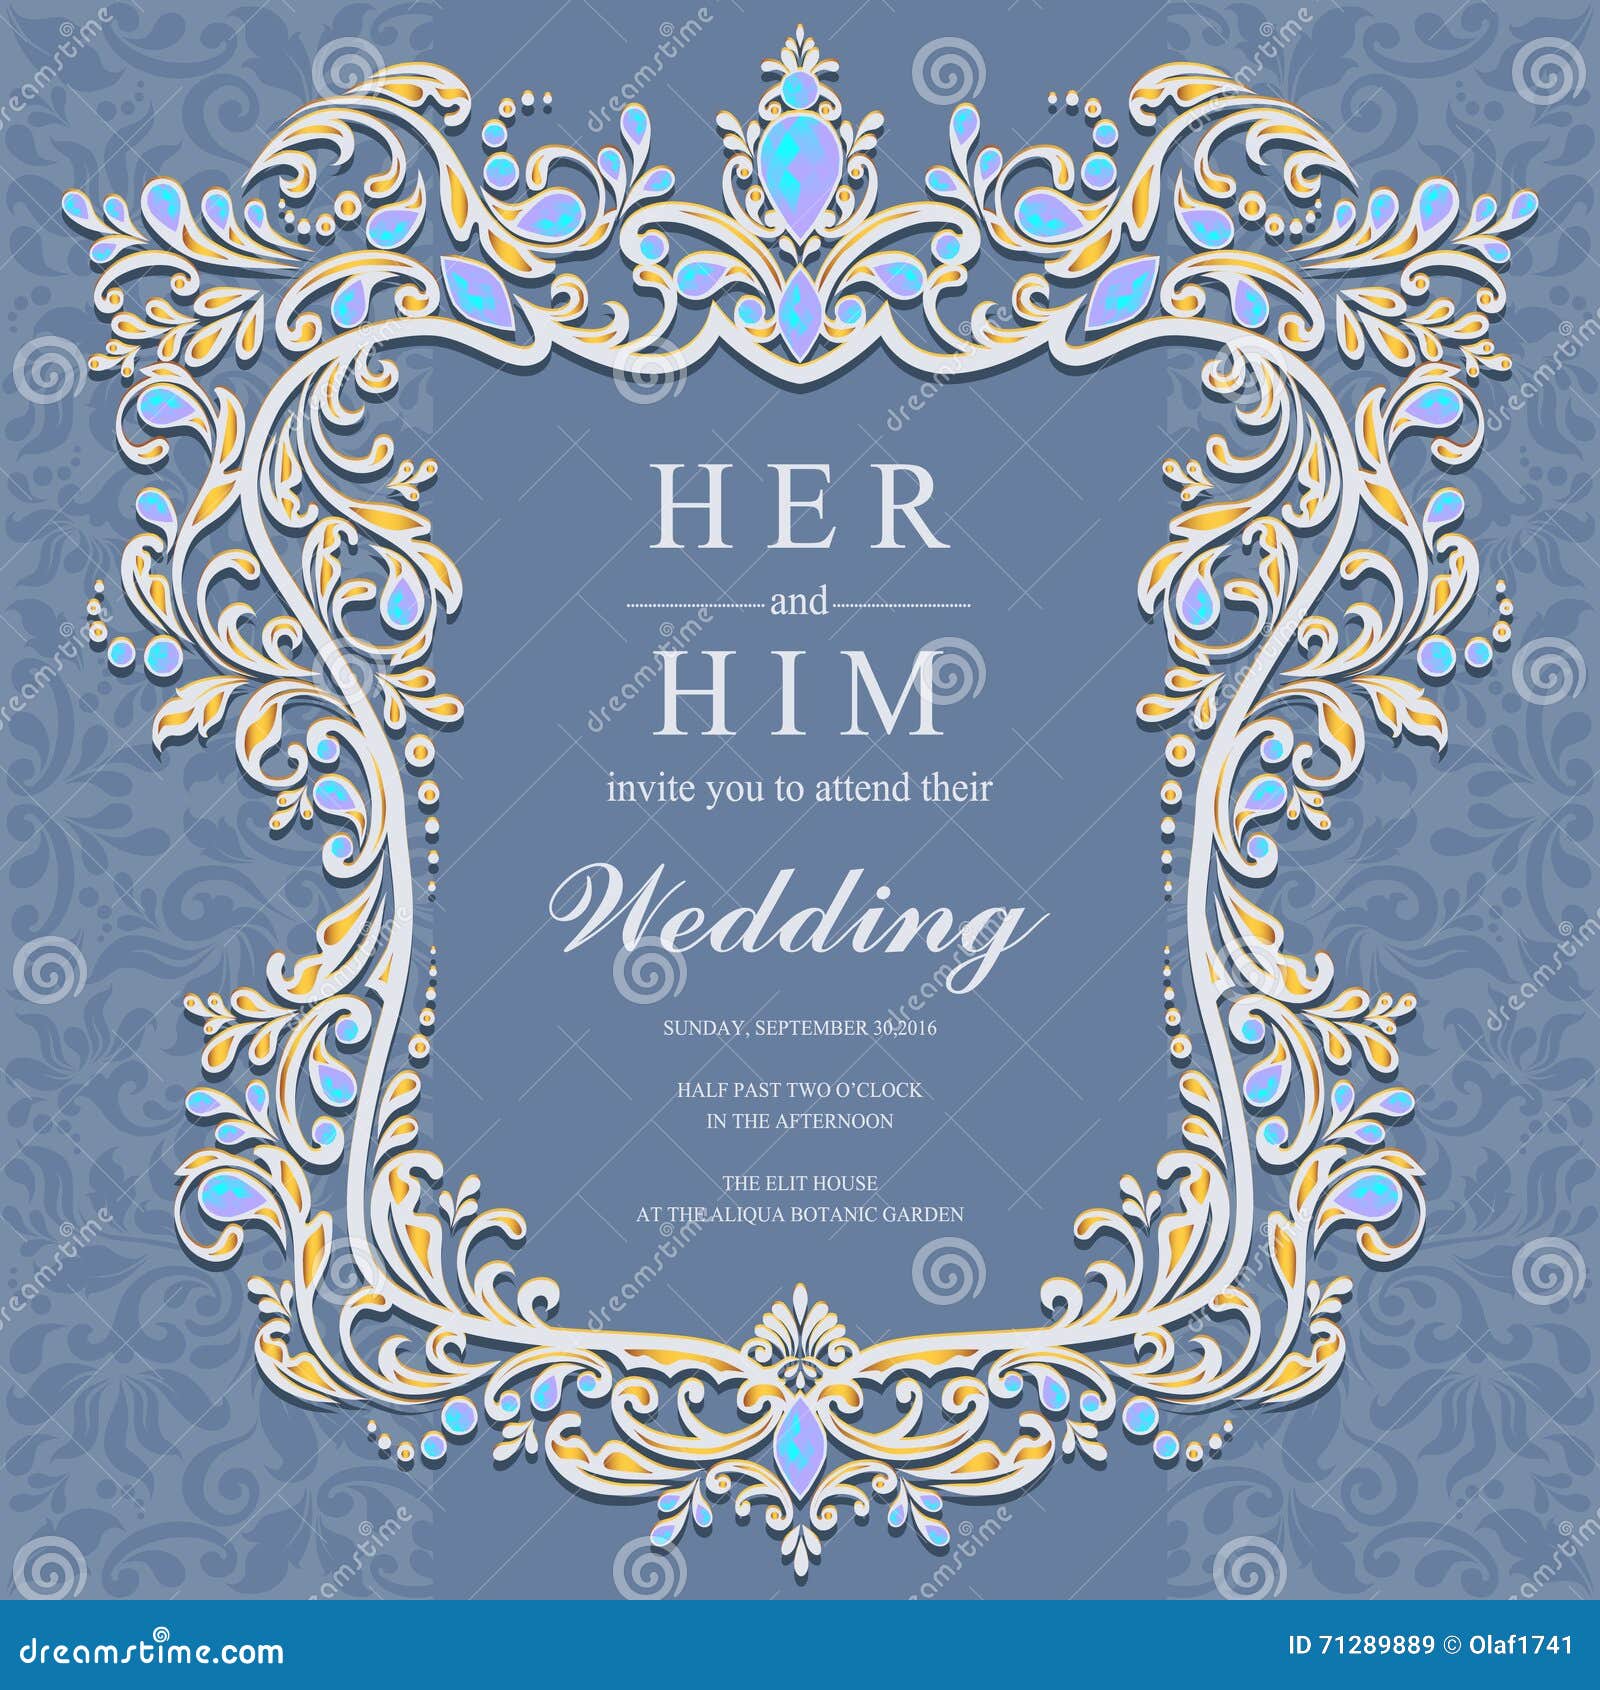 Muslim Wedding Invitation Card Vector Images Over 3 200